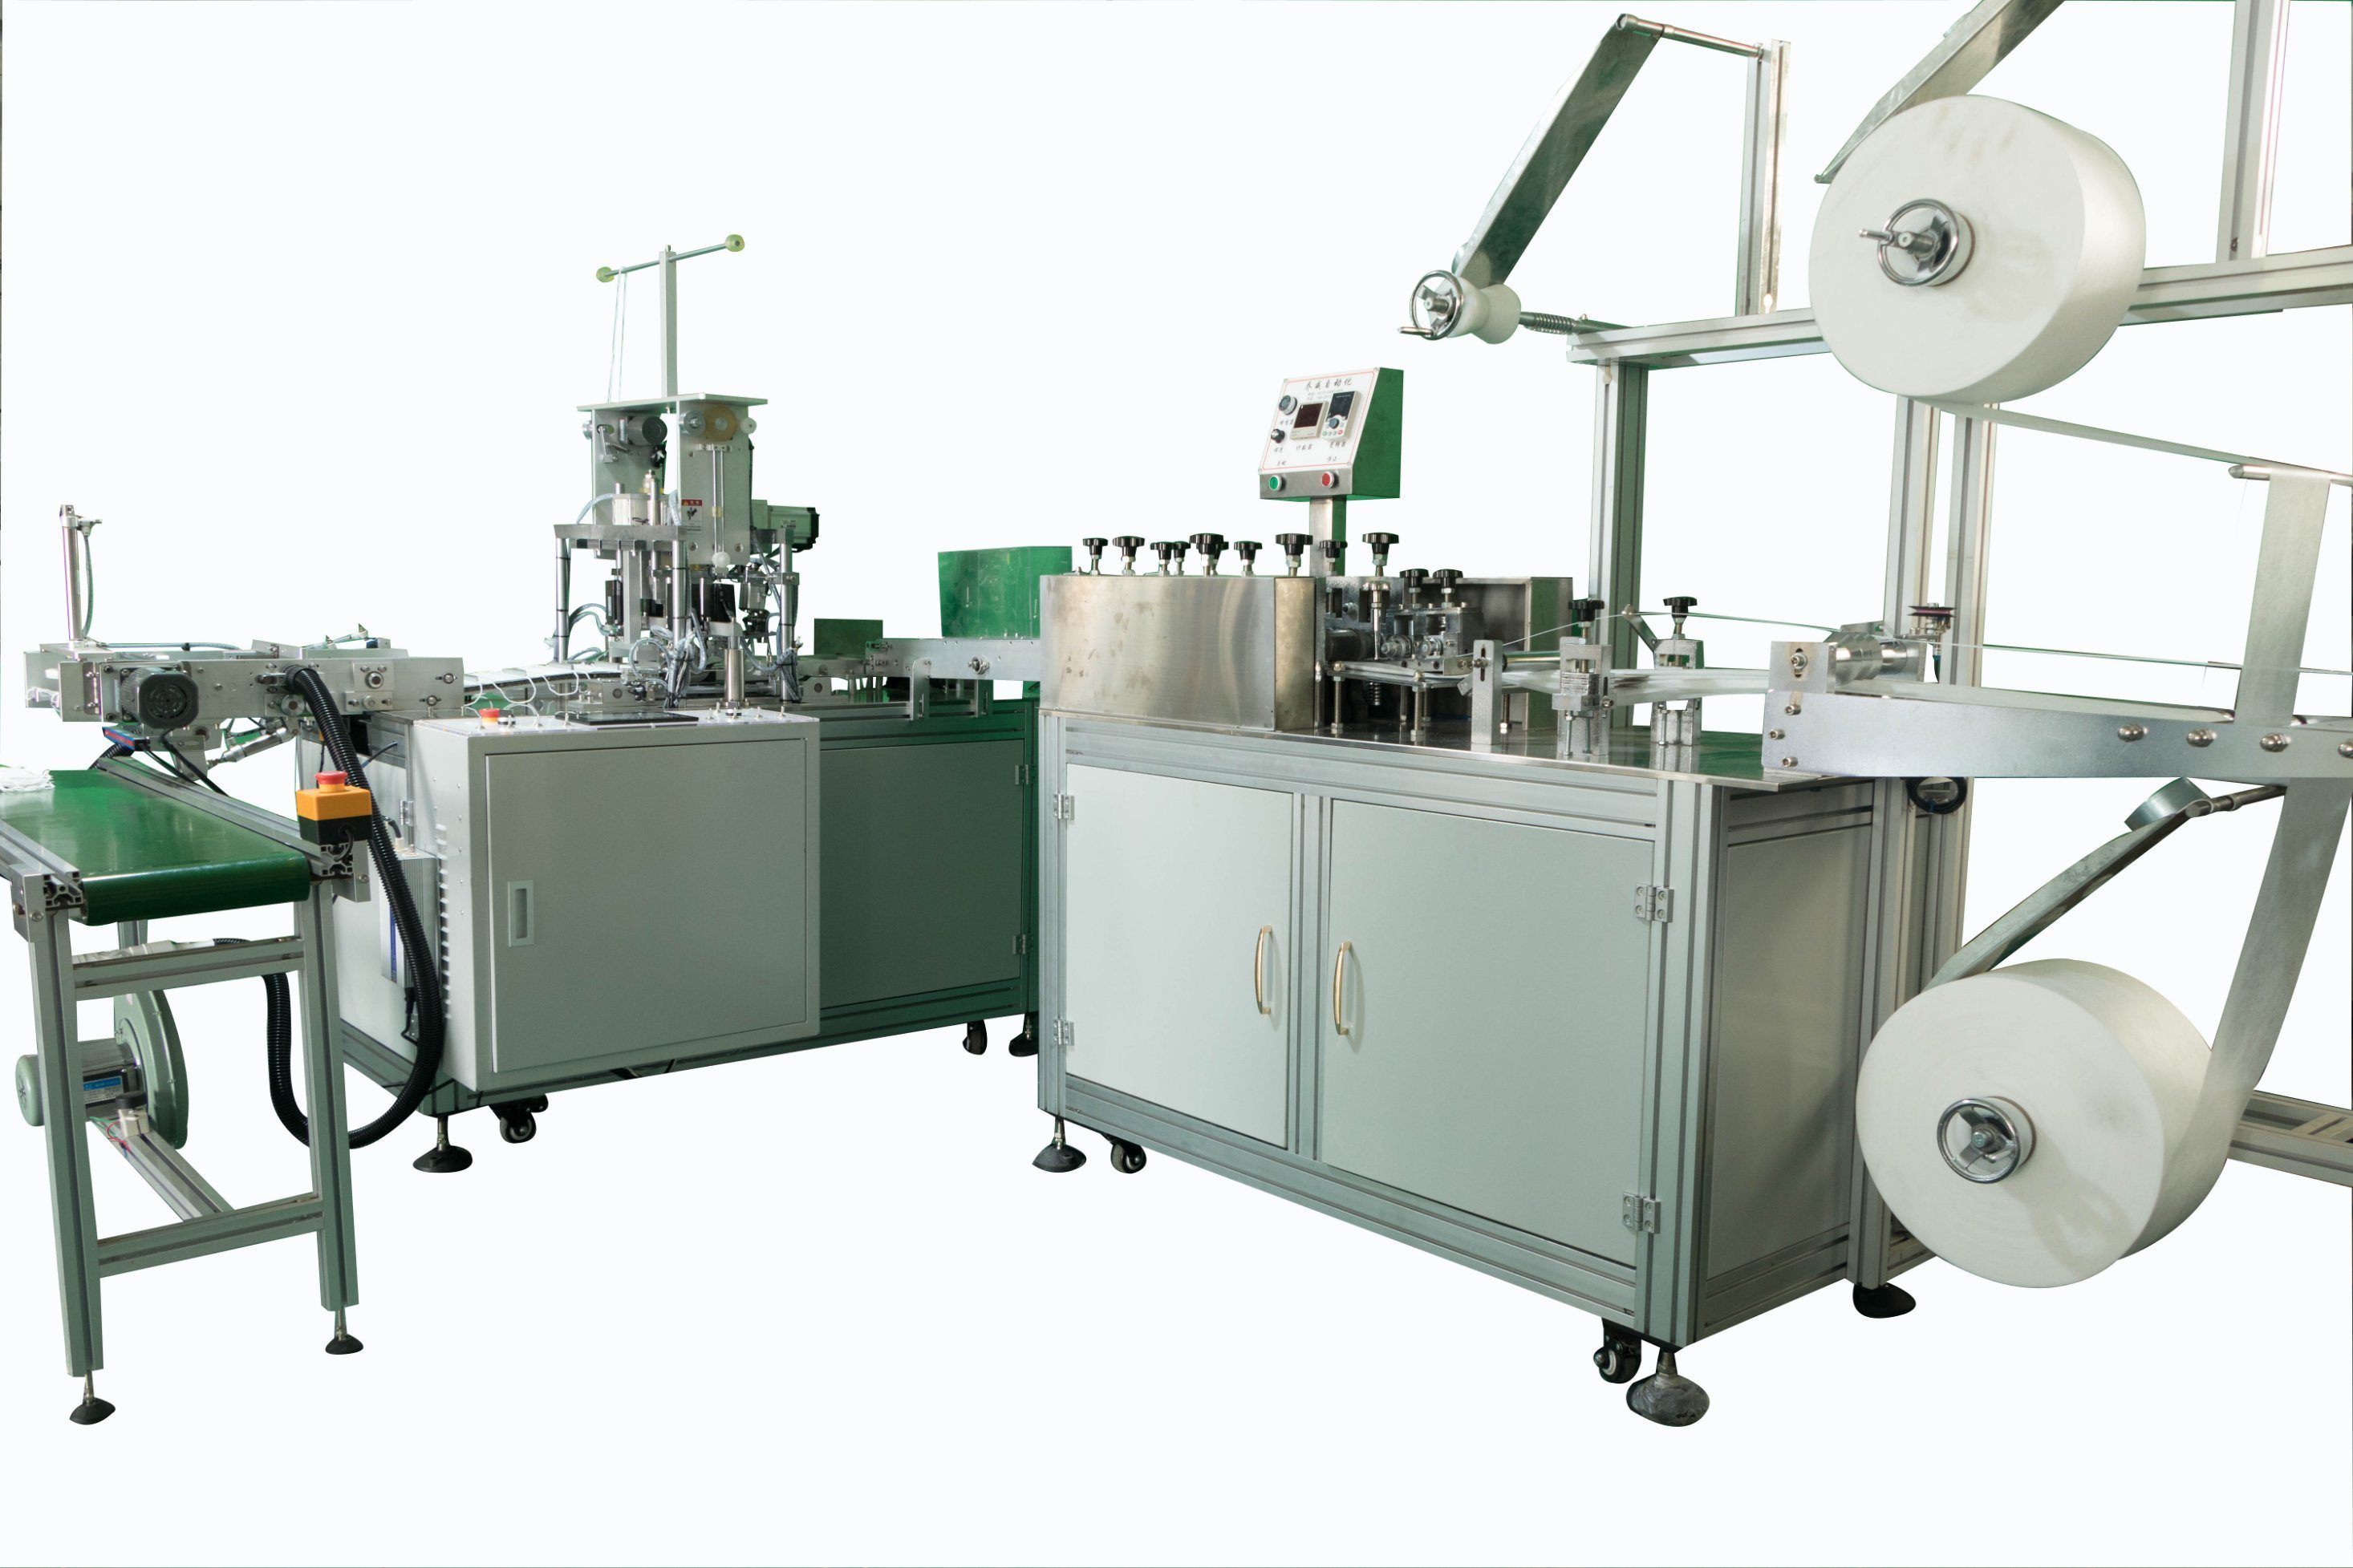 Cosmetic Mask Textile Machinery Spare Parts Inner Ear-Loop Welding Machine (Air Cylinder Type)